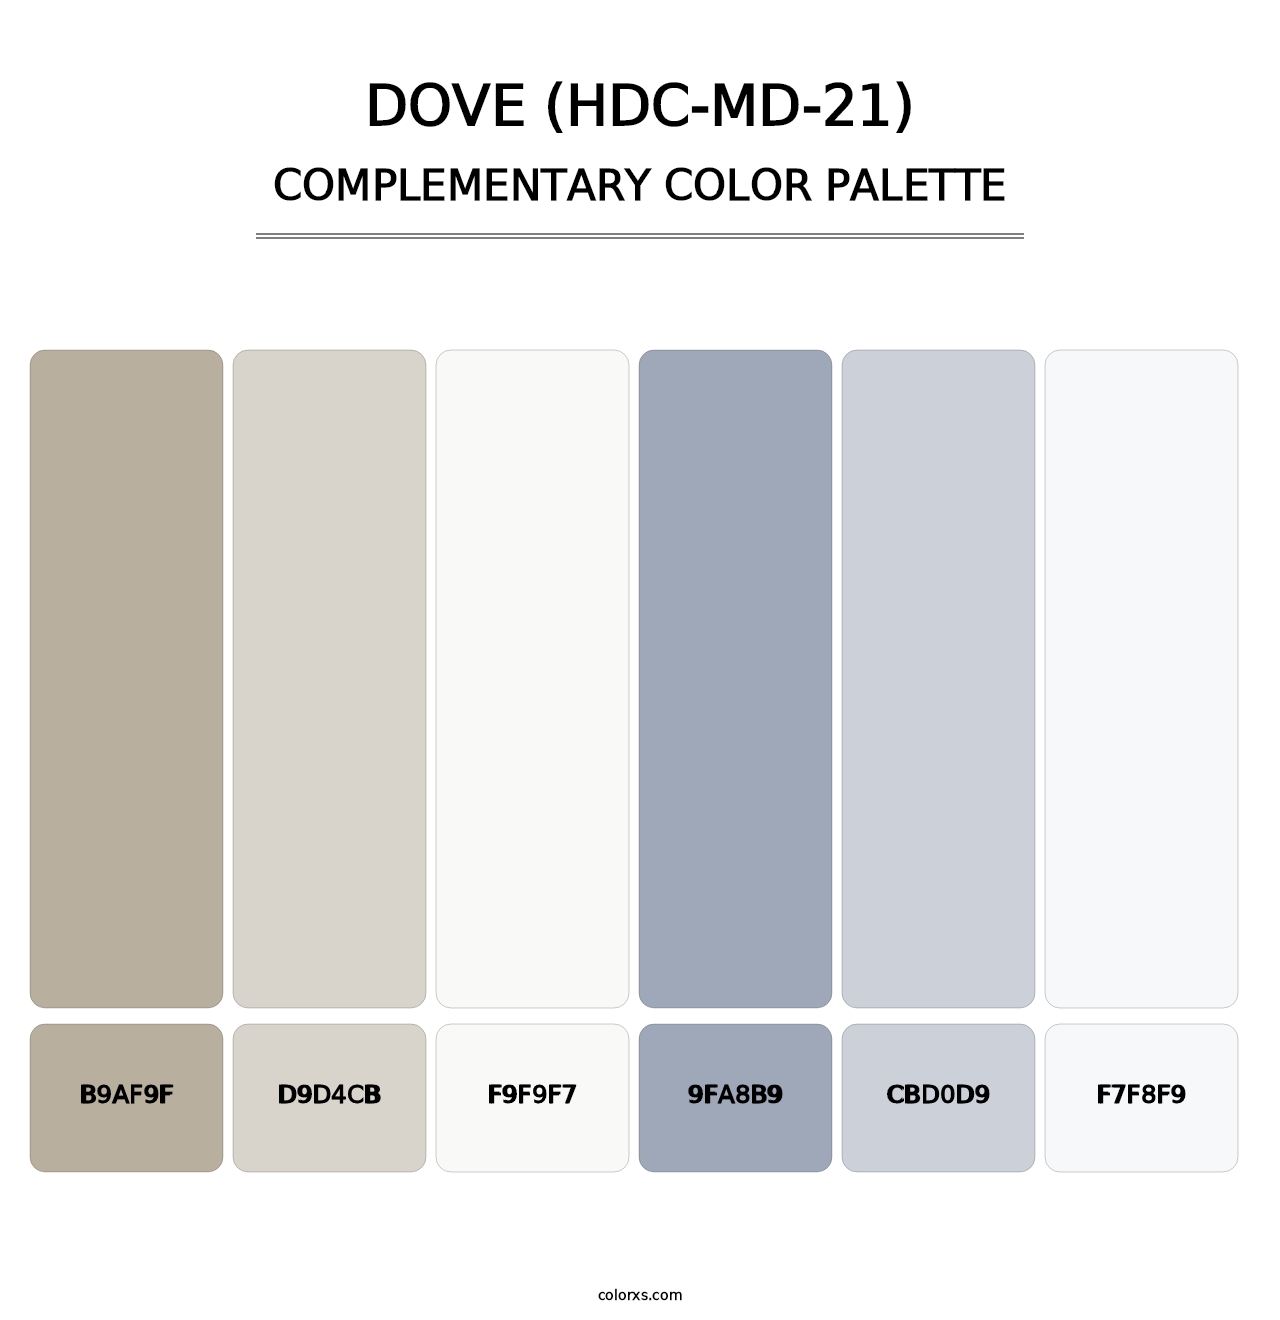 Dove (HDC-MD-21) - Complementary Color Palette